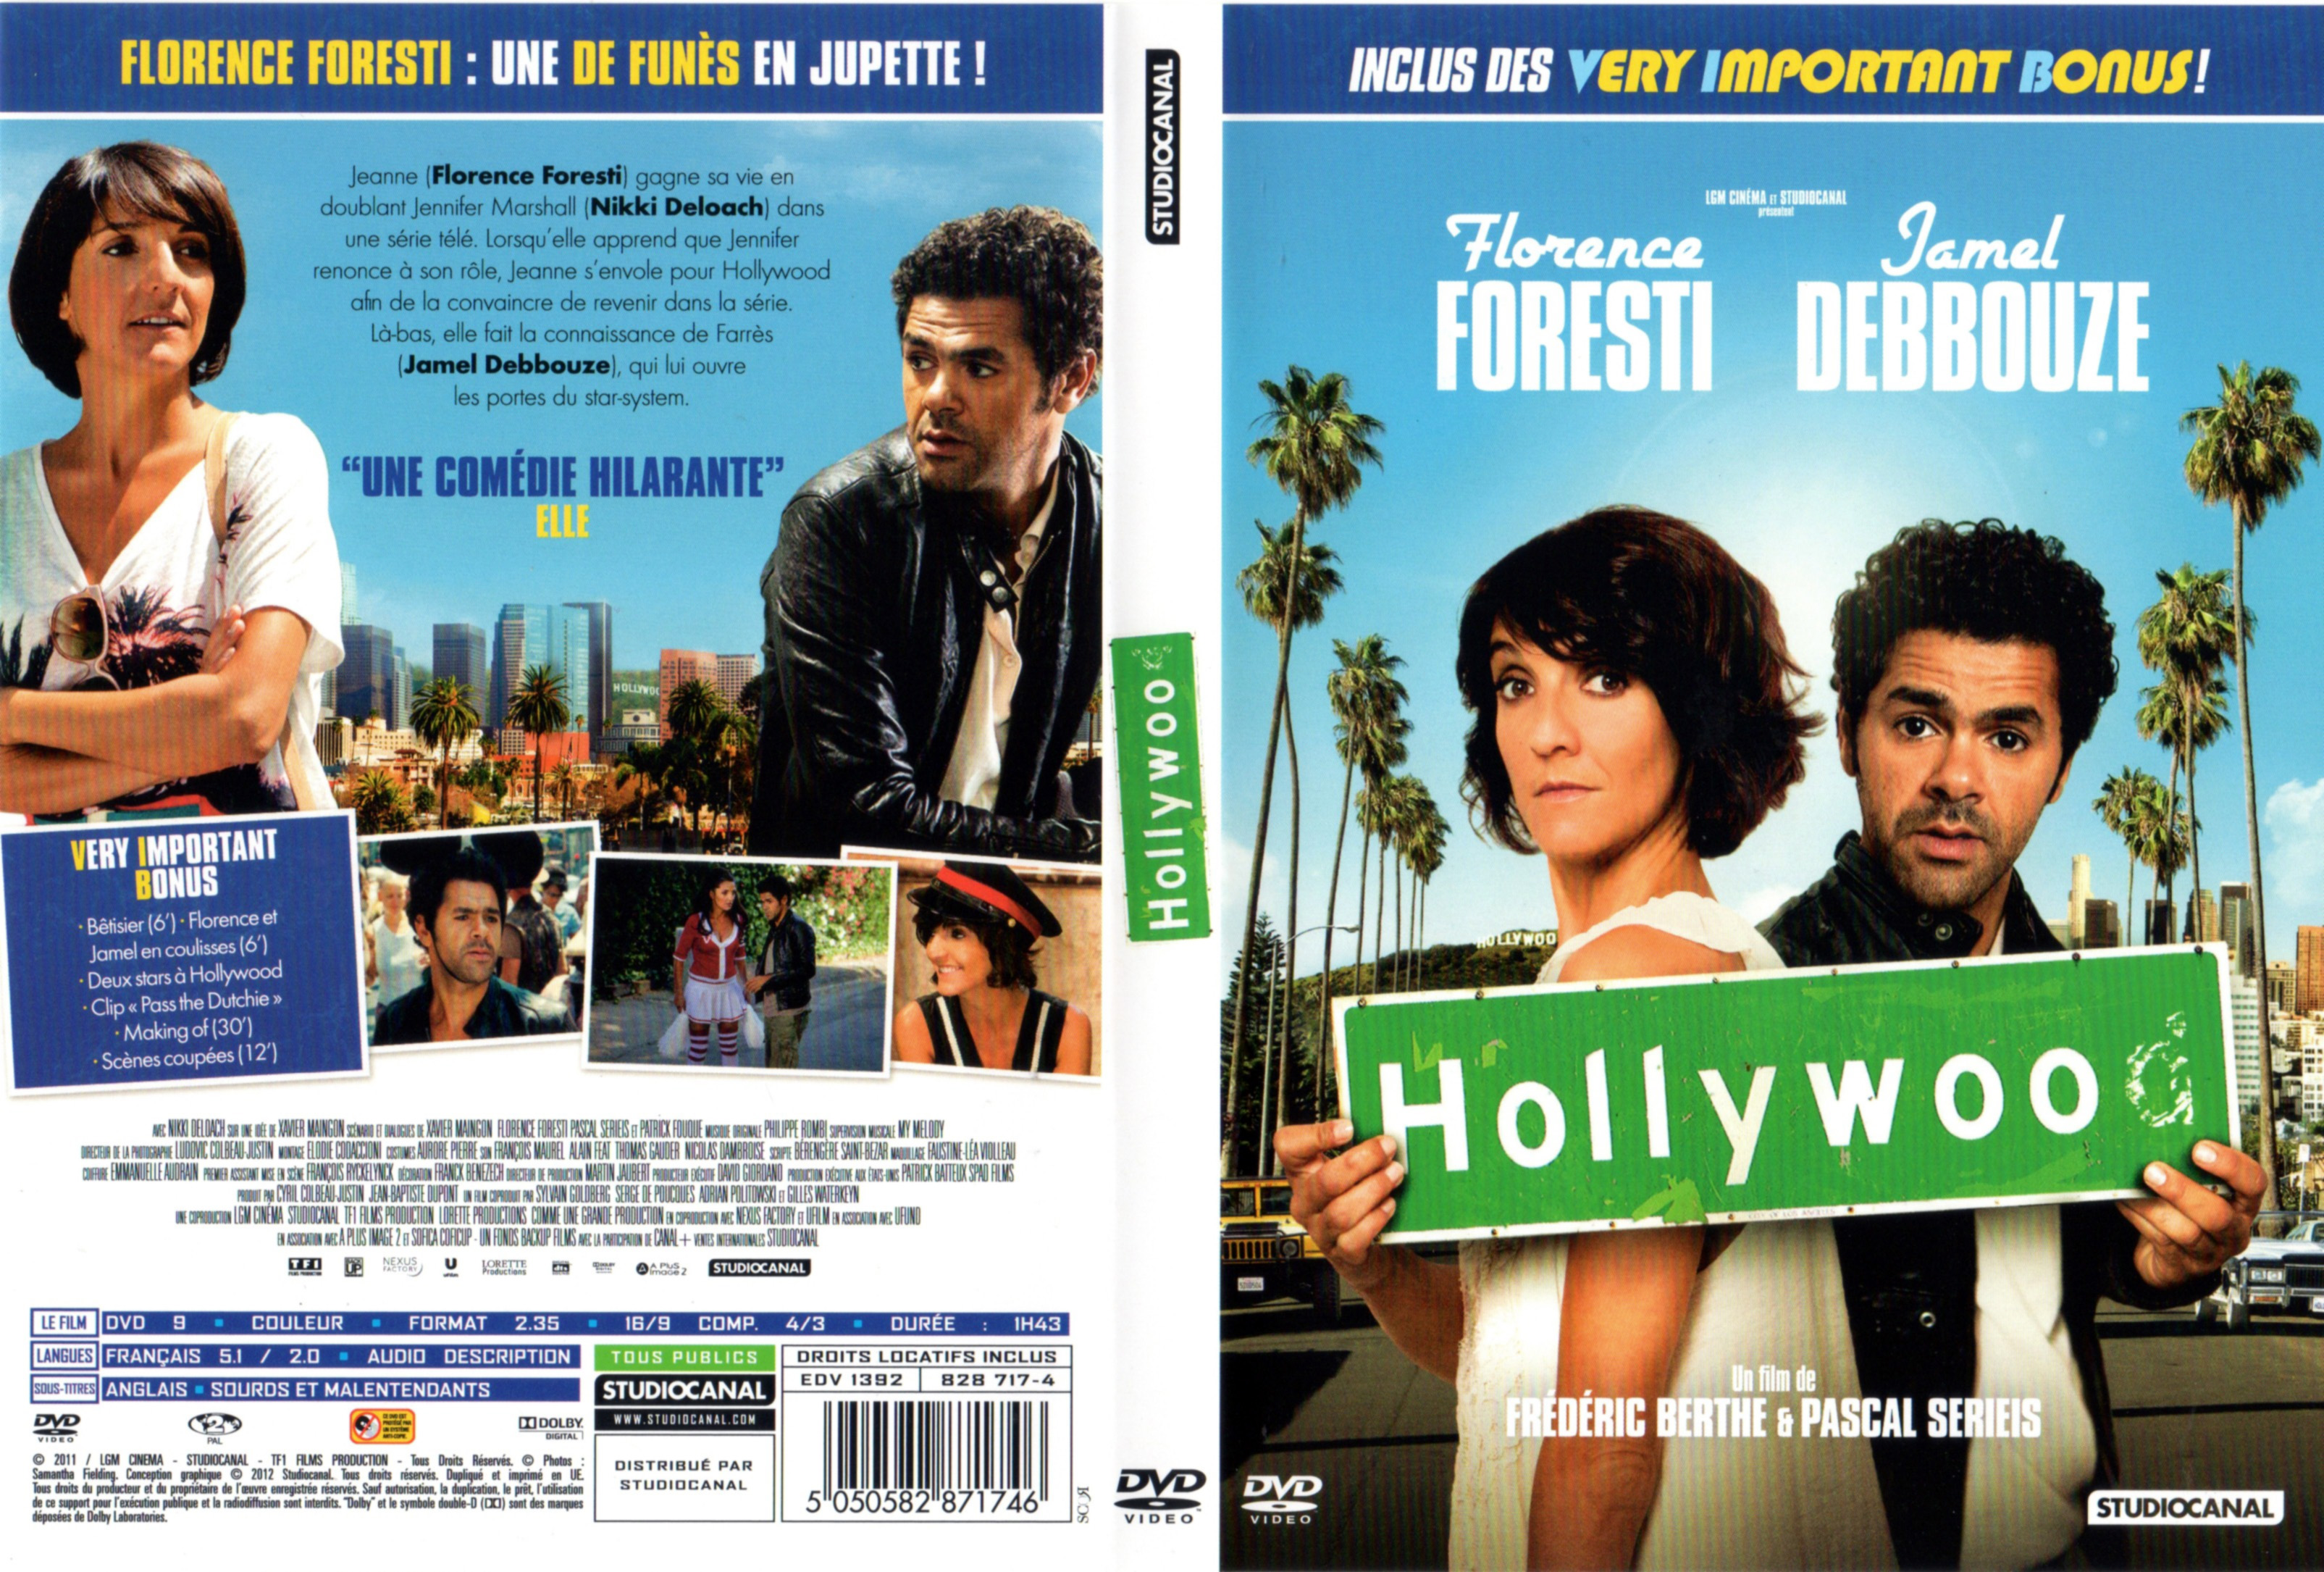 Jaquette DVD Hollywoo